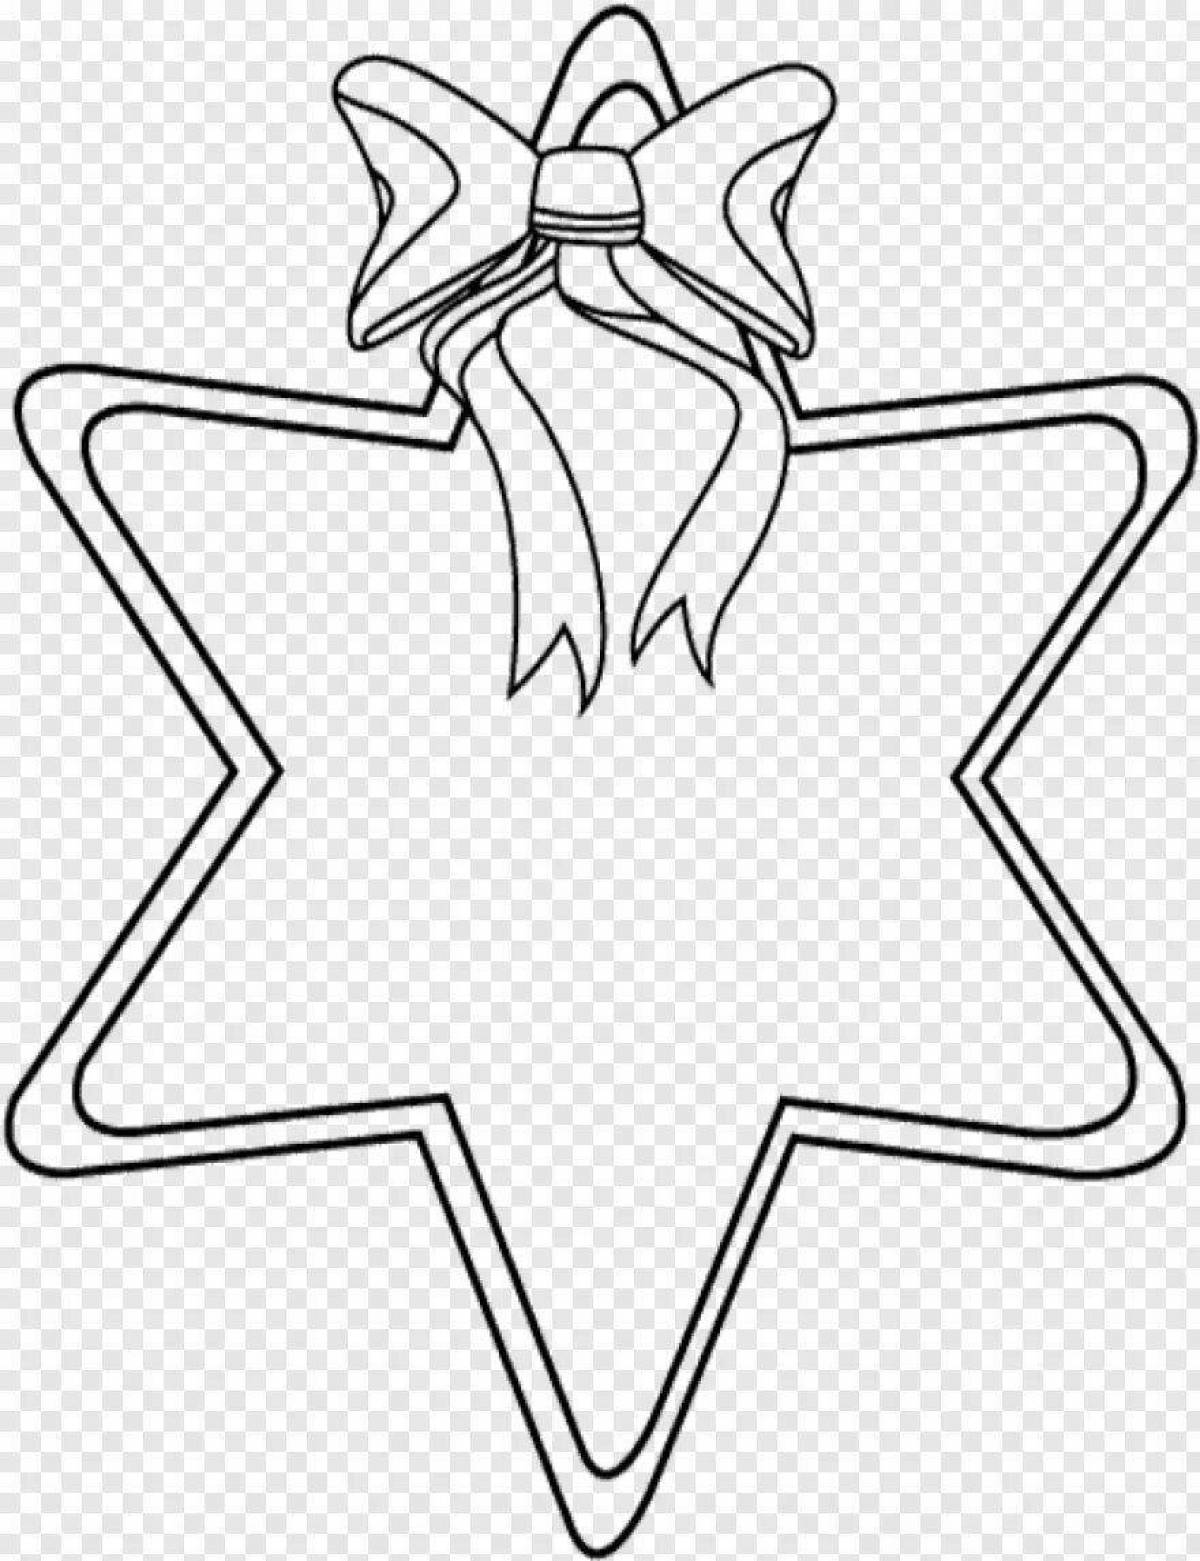 Mystic star coloring pages for kids